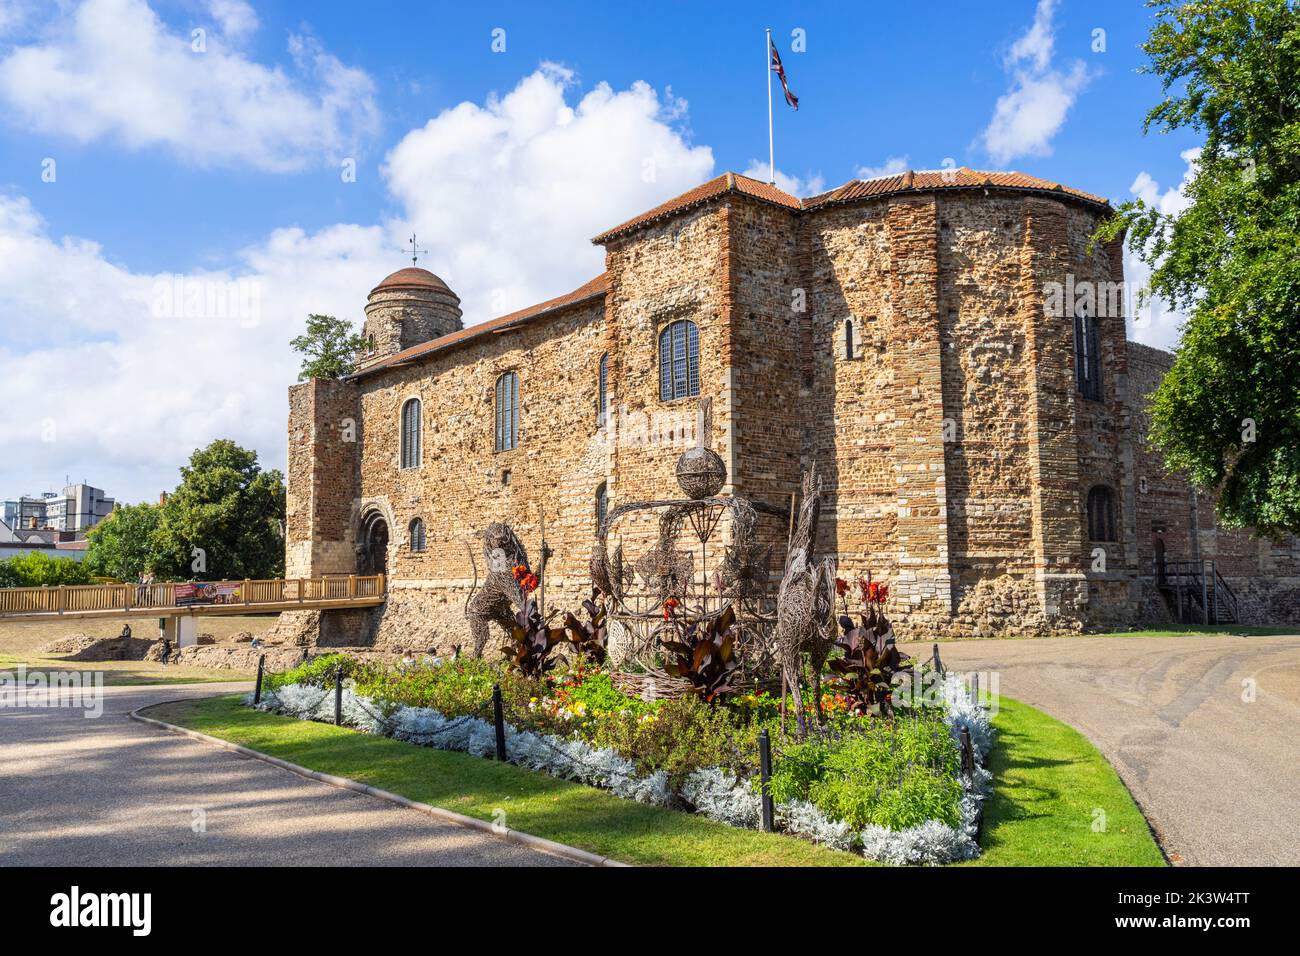 Flower beds in front of Colchester castle a Norman castle built on Roman ruins in Castle Park Colchester Essex England UK GB Europe Stock Photo